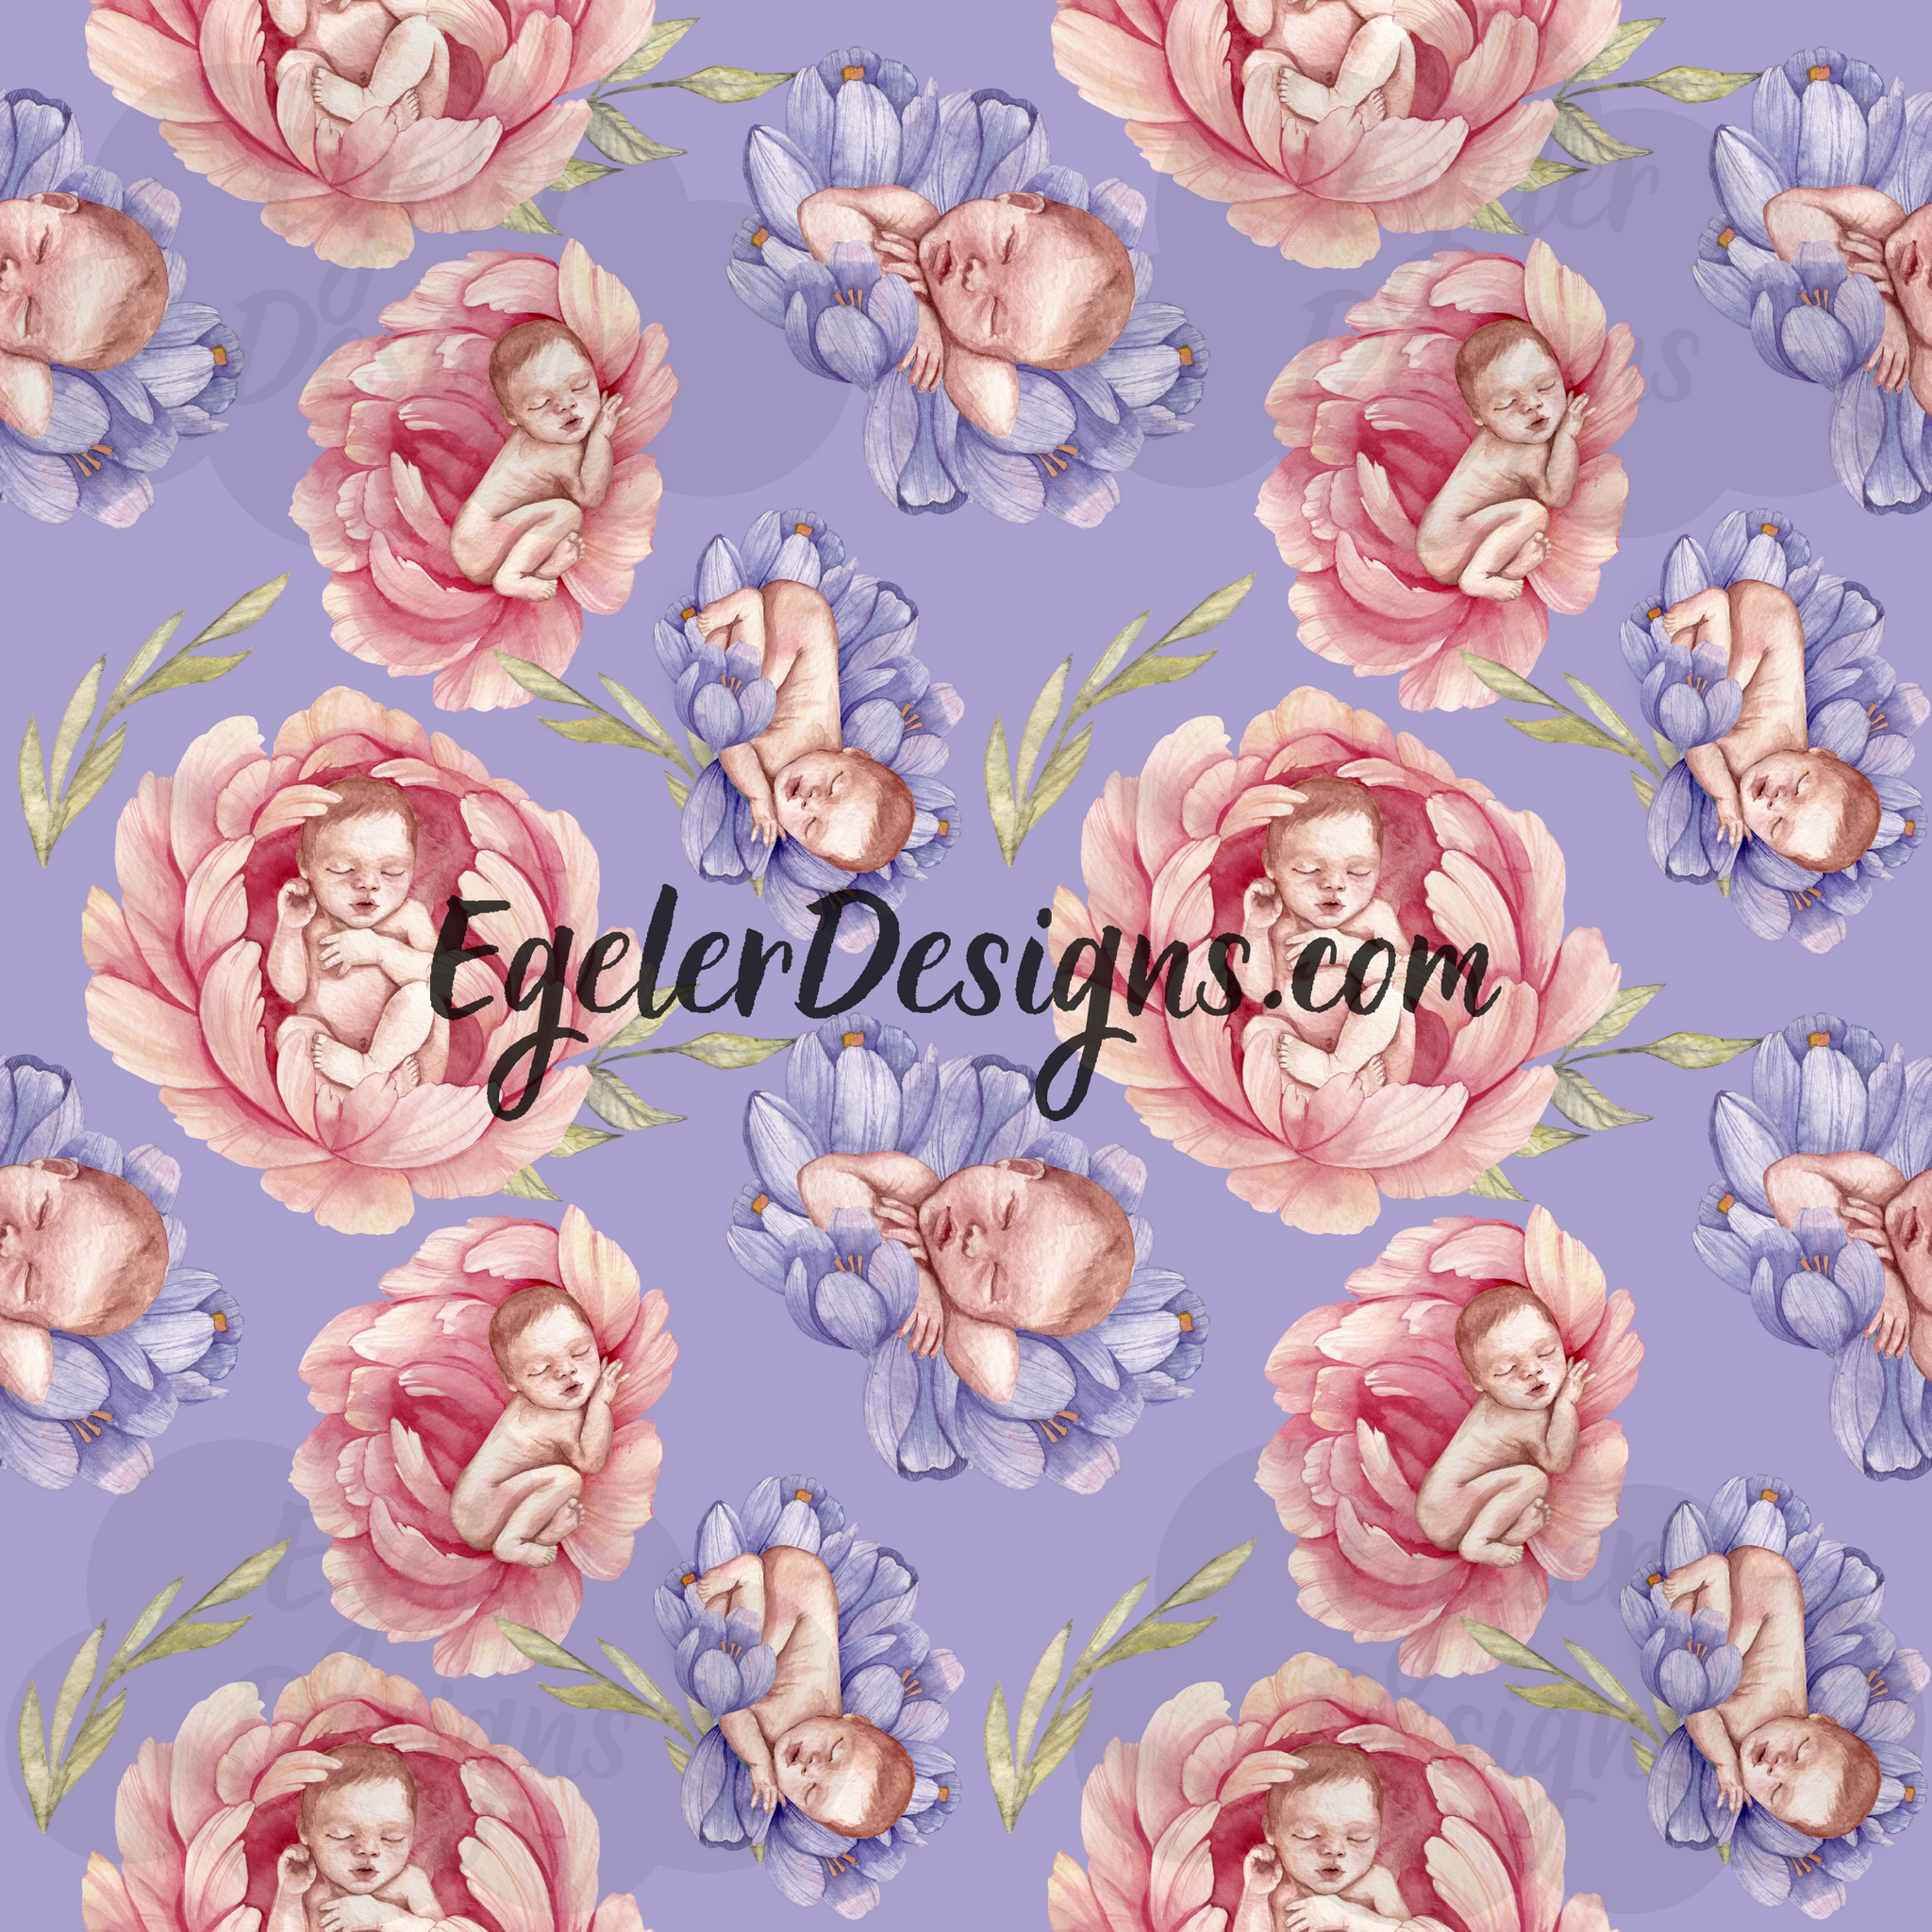 Purple Midwife Floral